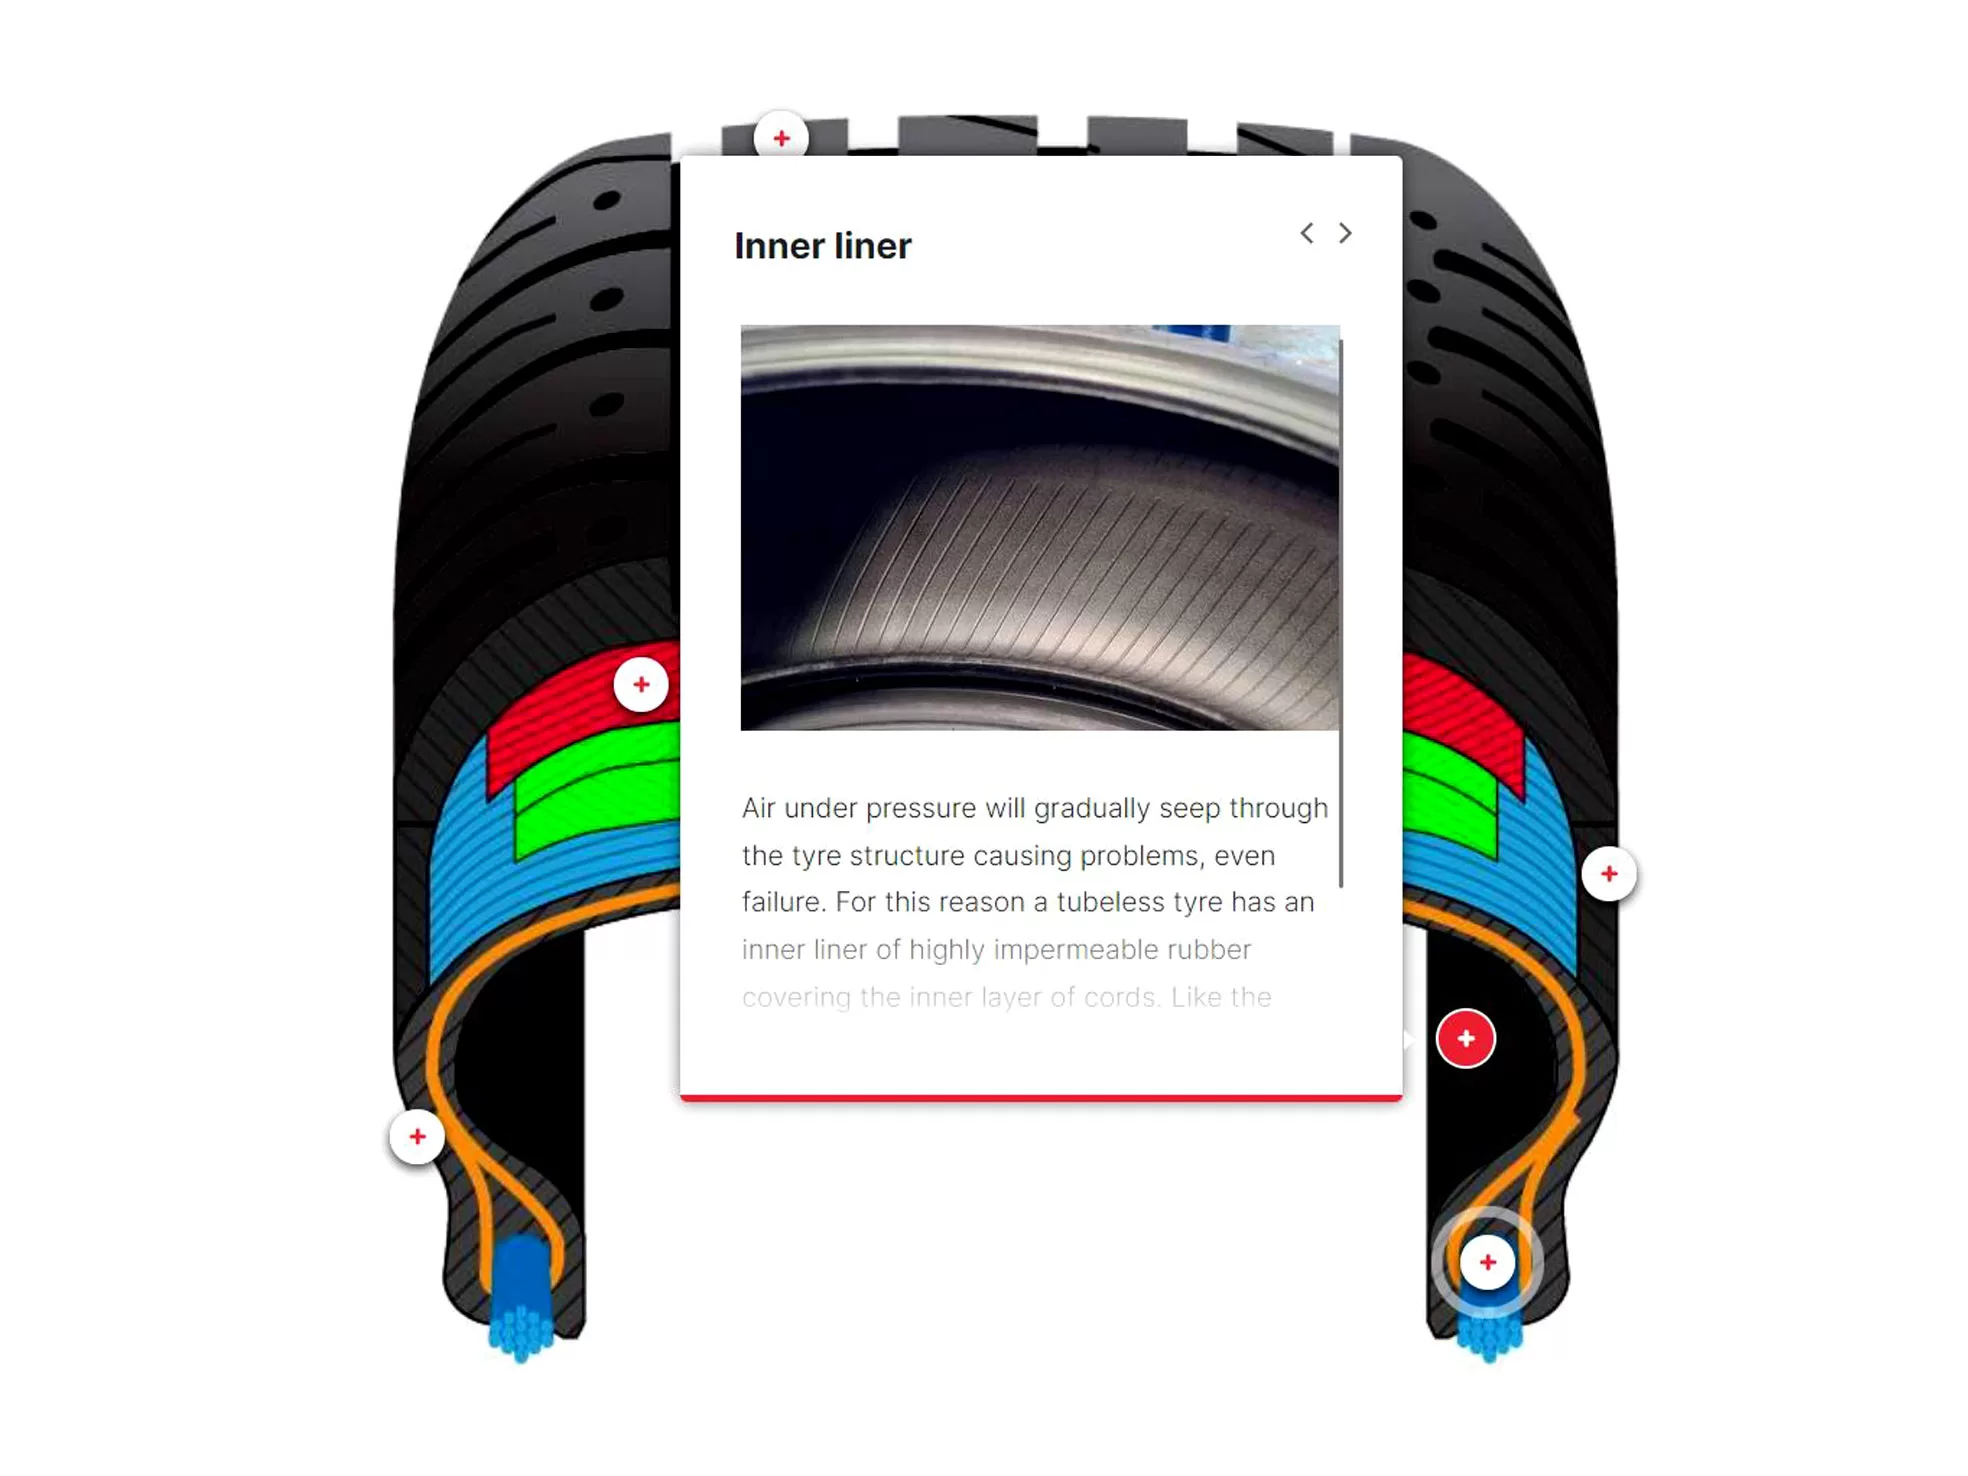 An interactive hot spot diagram showing the components of a car tyre